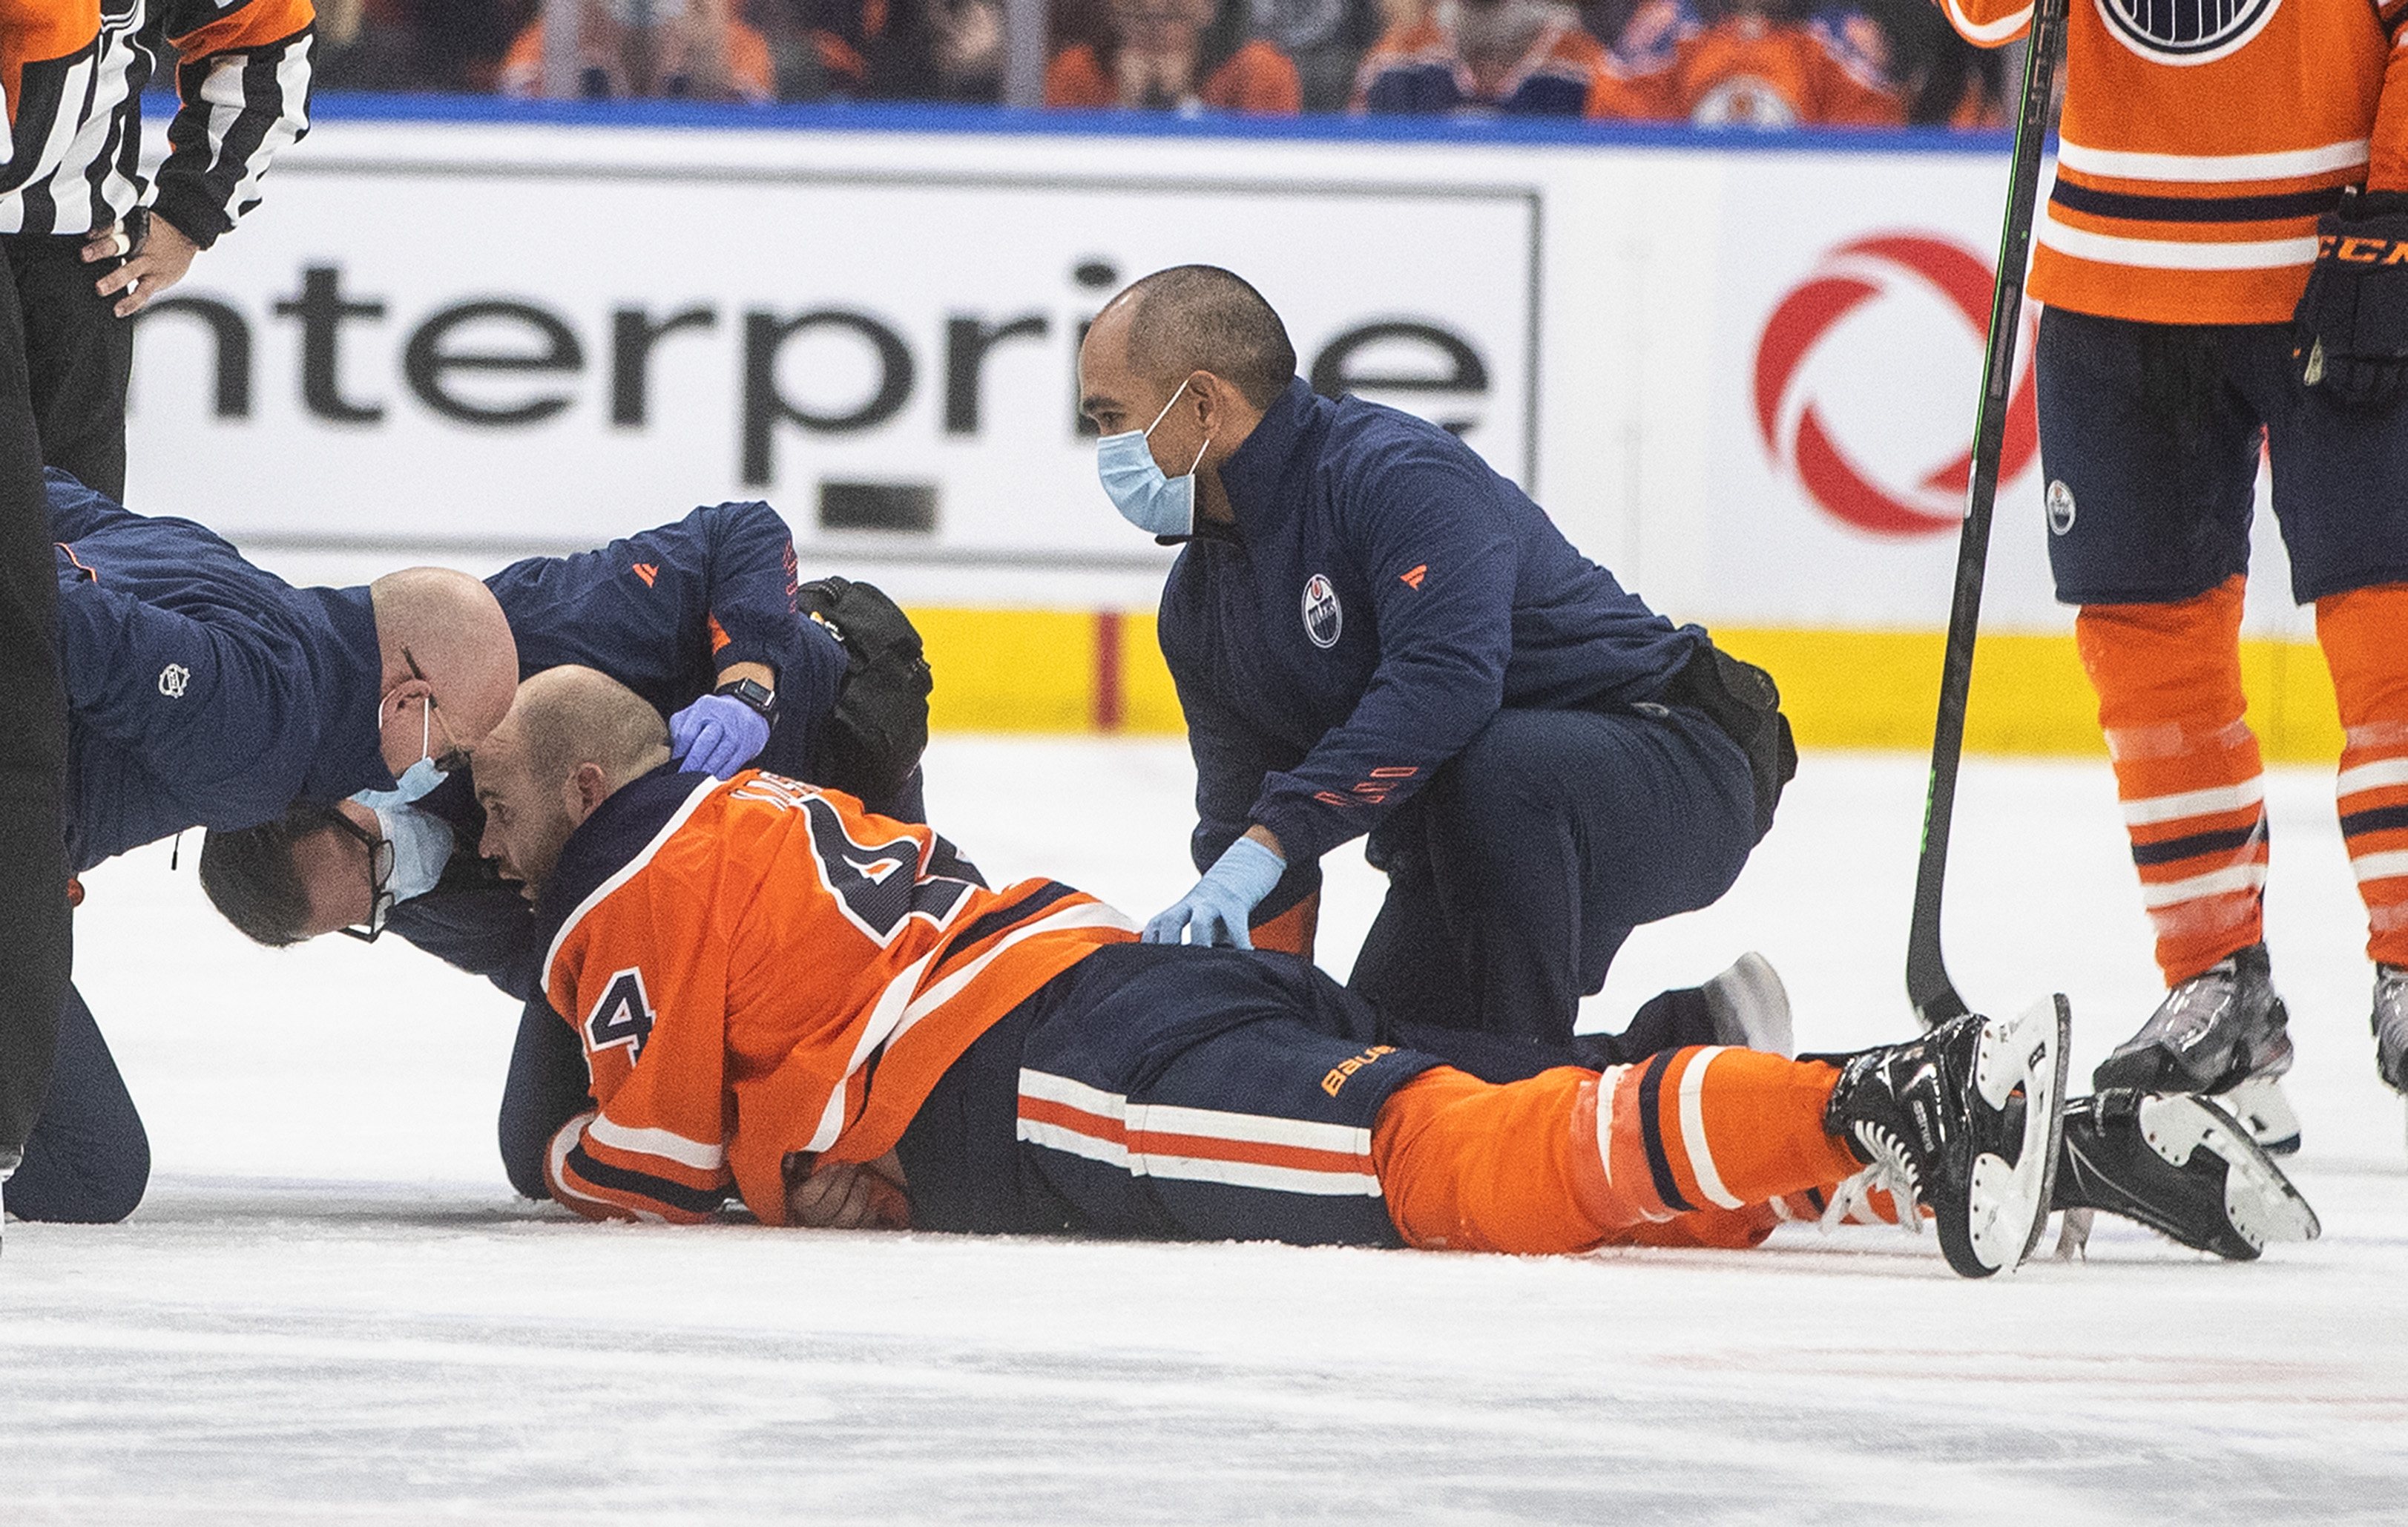 Oilers forward Zack Kassian 'in good spirits' after scary injury in fight